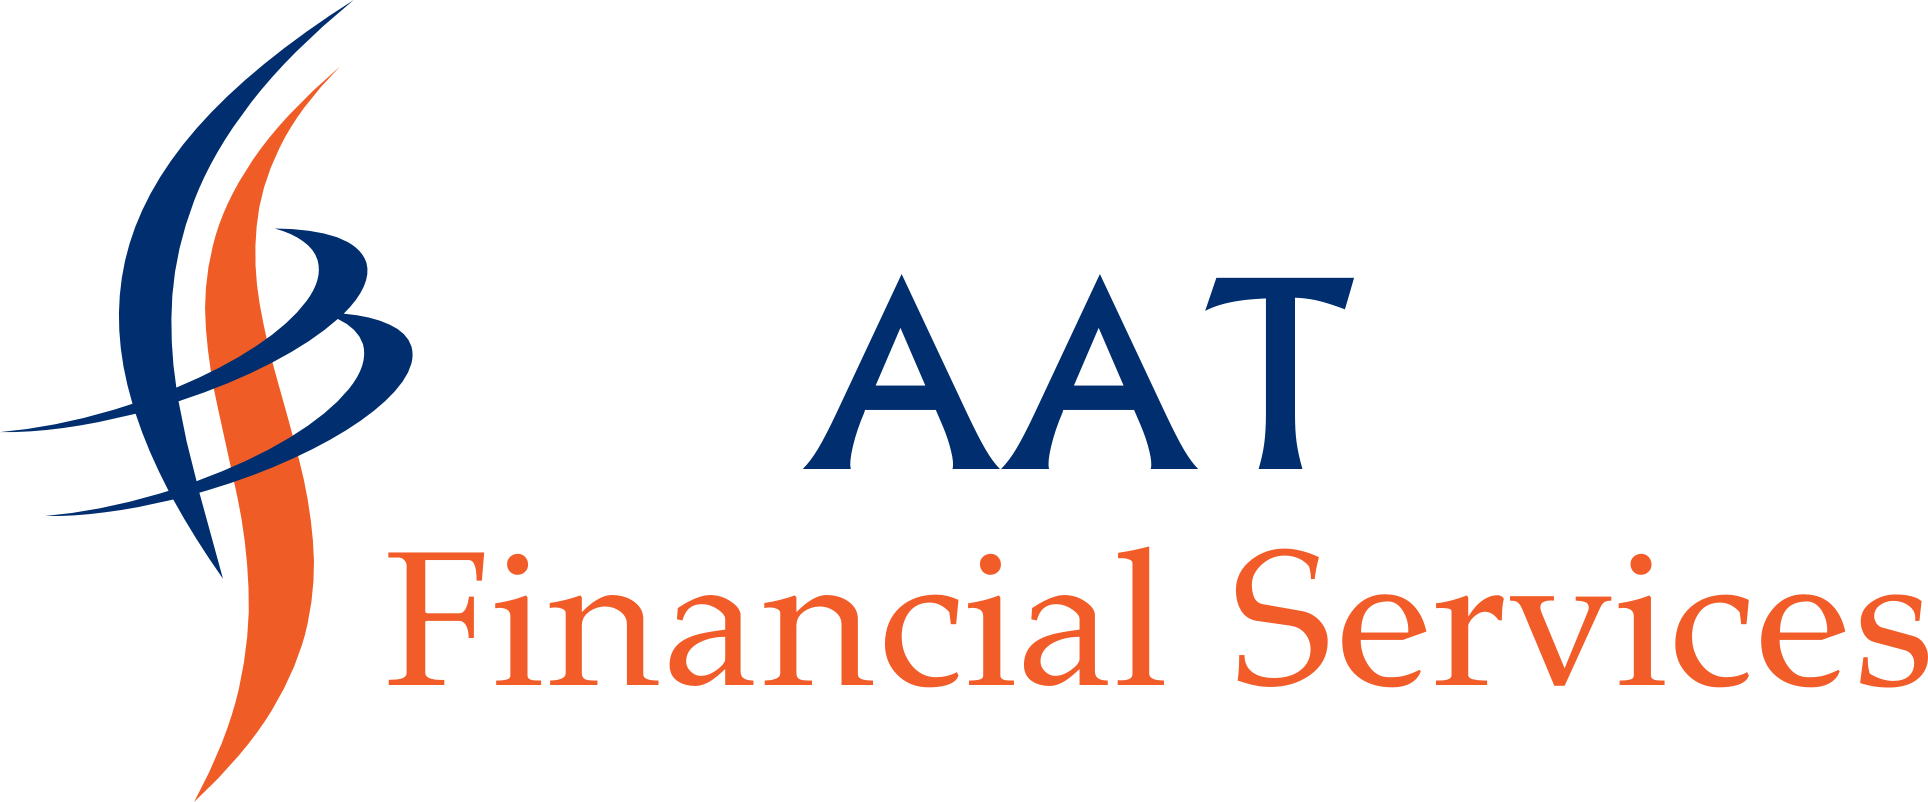 AAT Financial Services